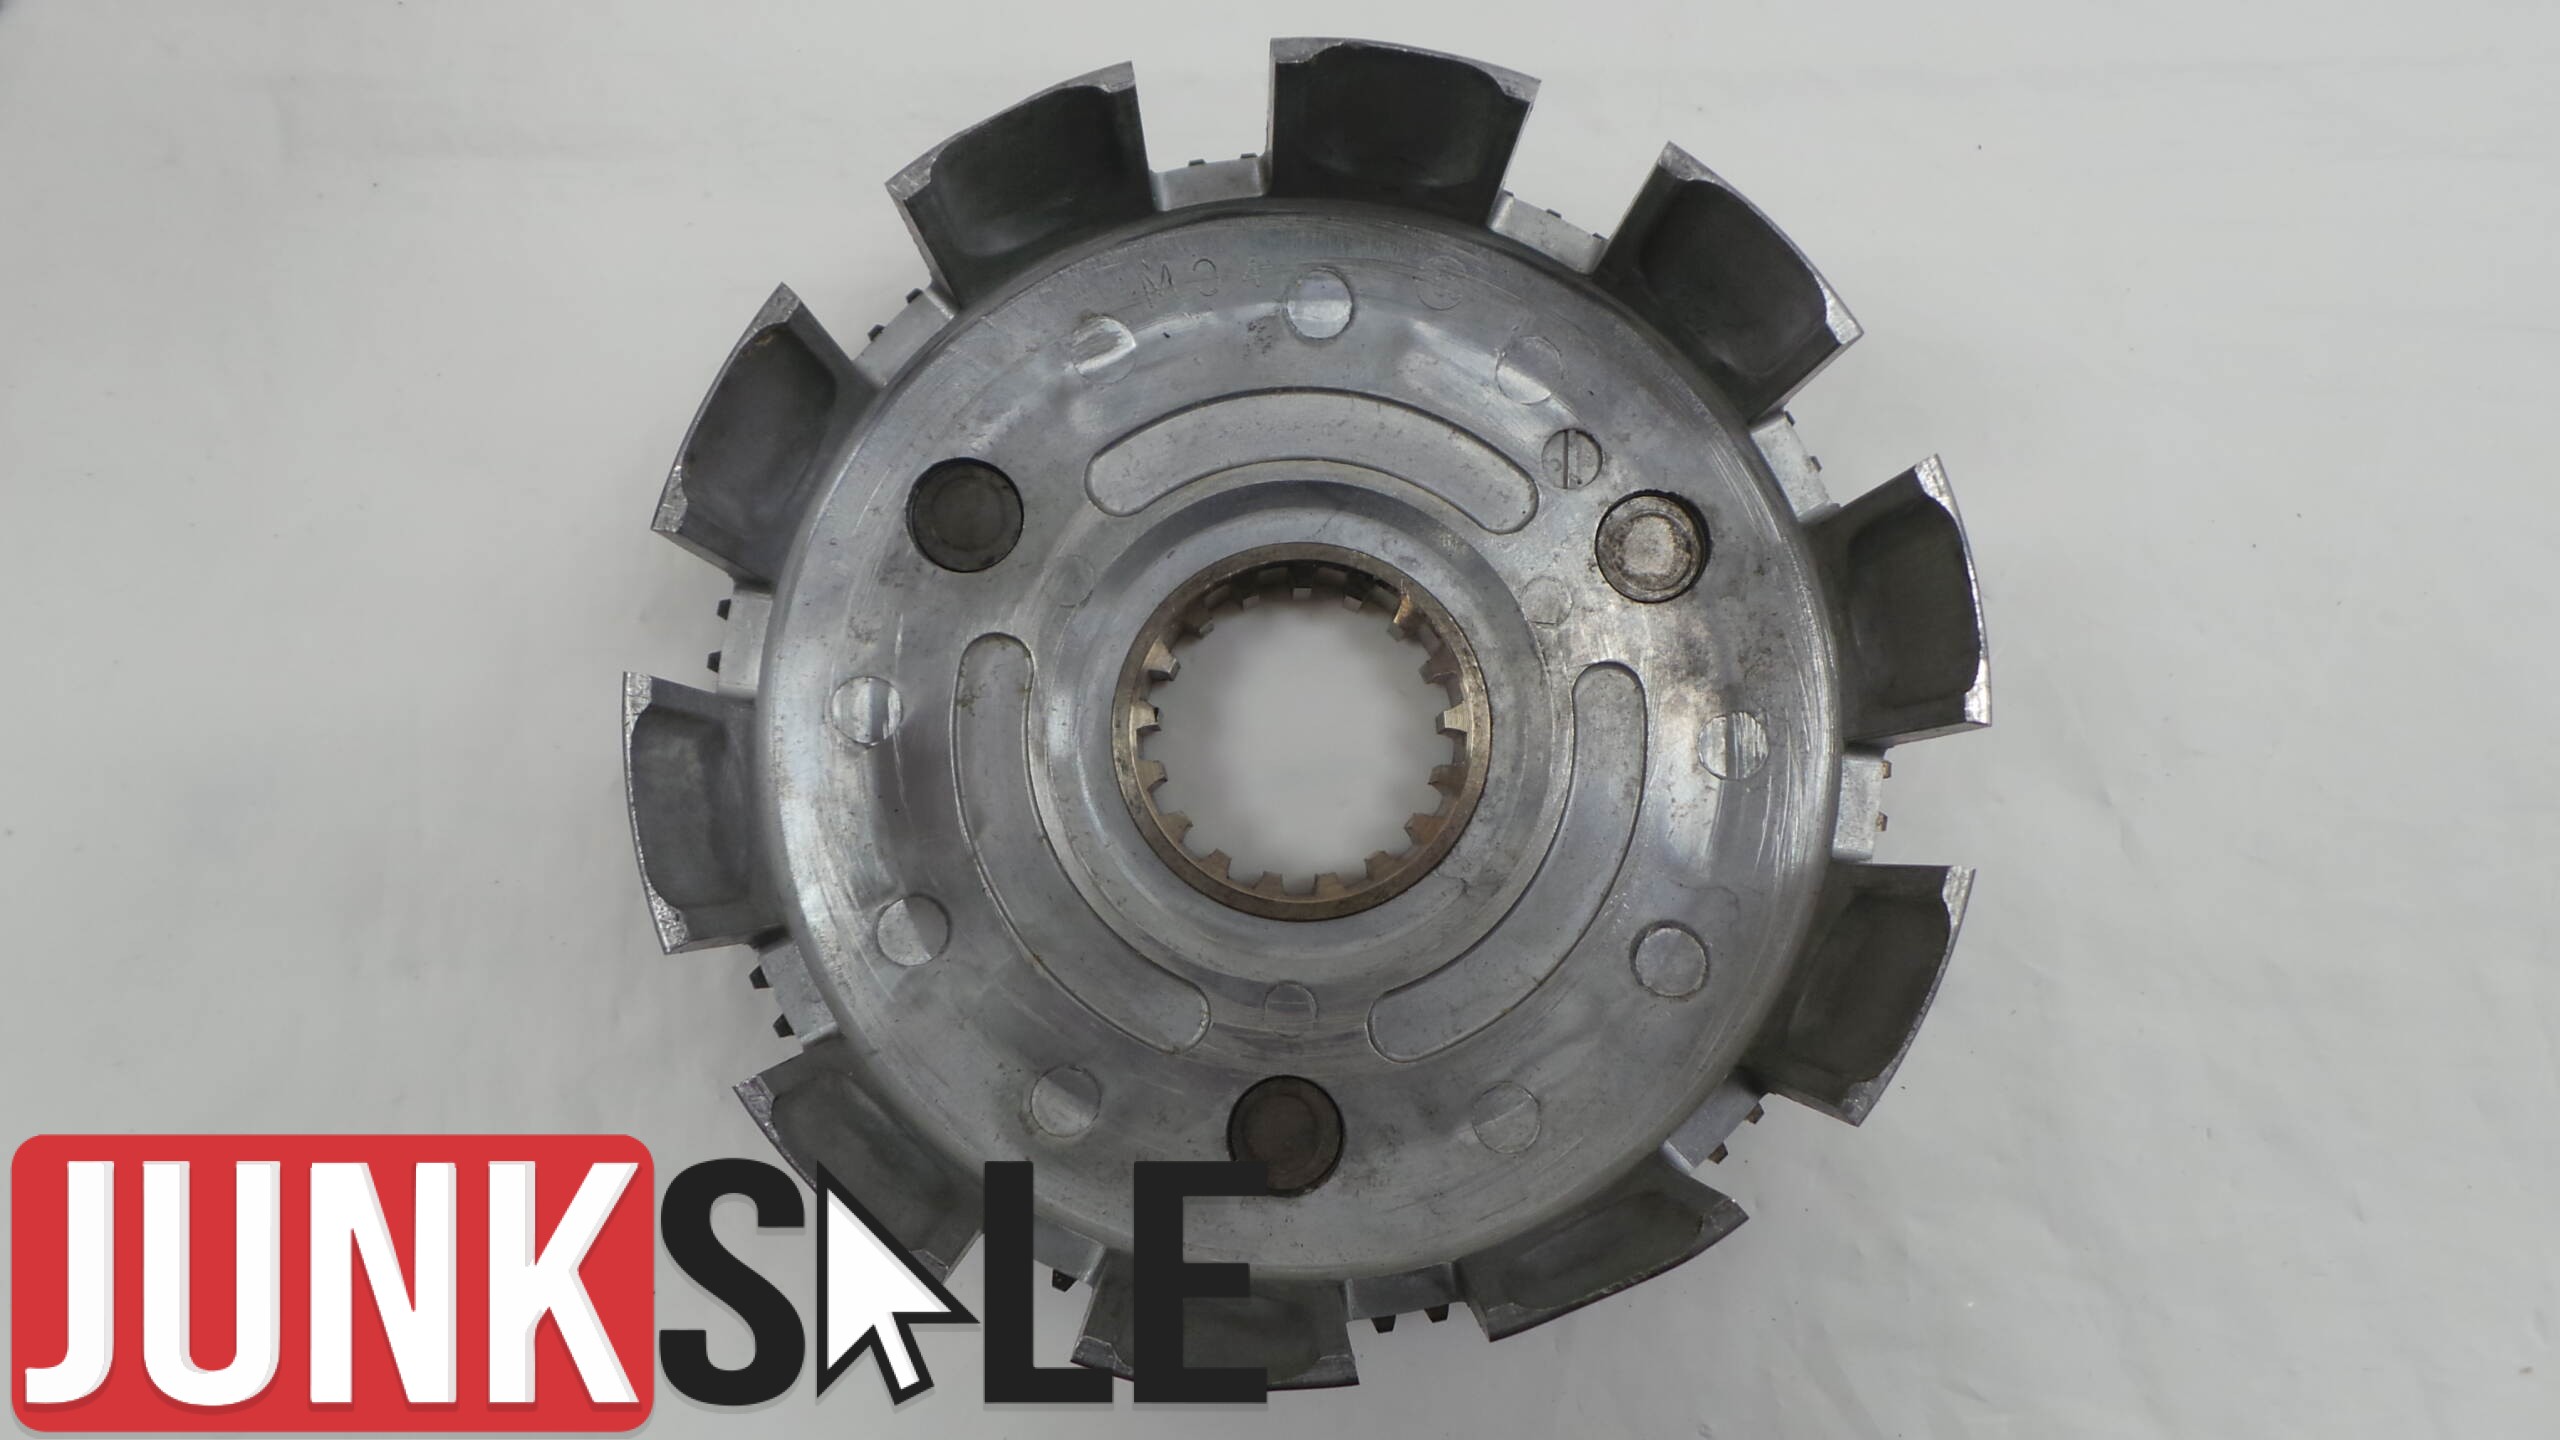 Honda Outer Comp, Clutch 22100-MA0-000 Sold As Seen Junksale Clearance 